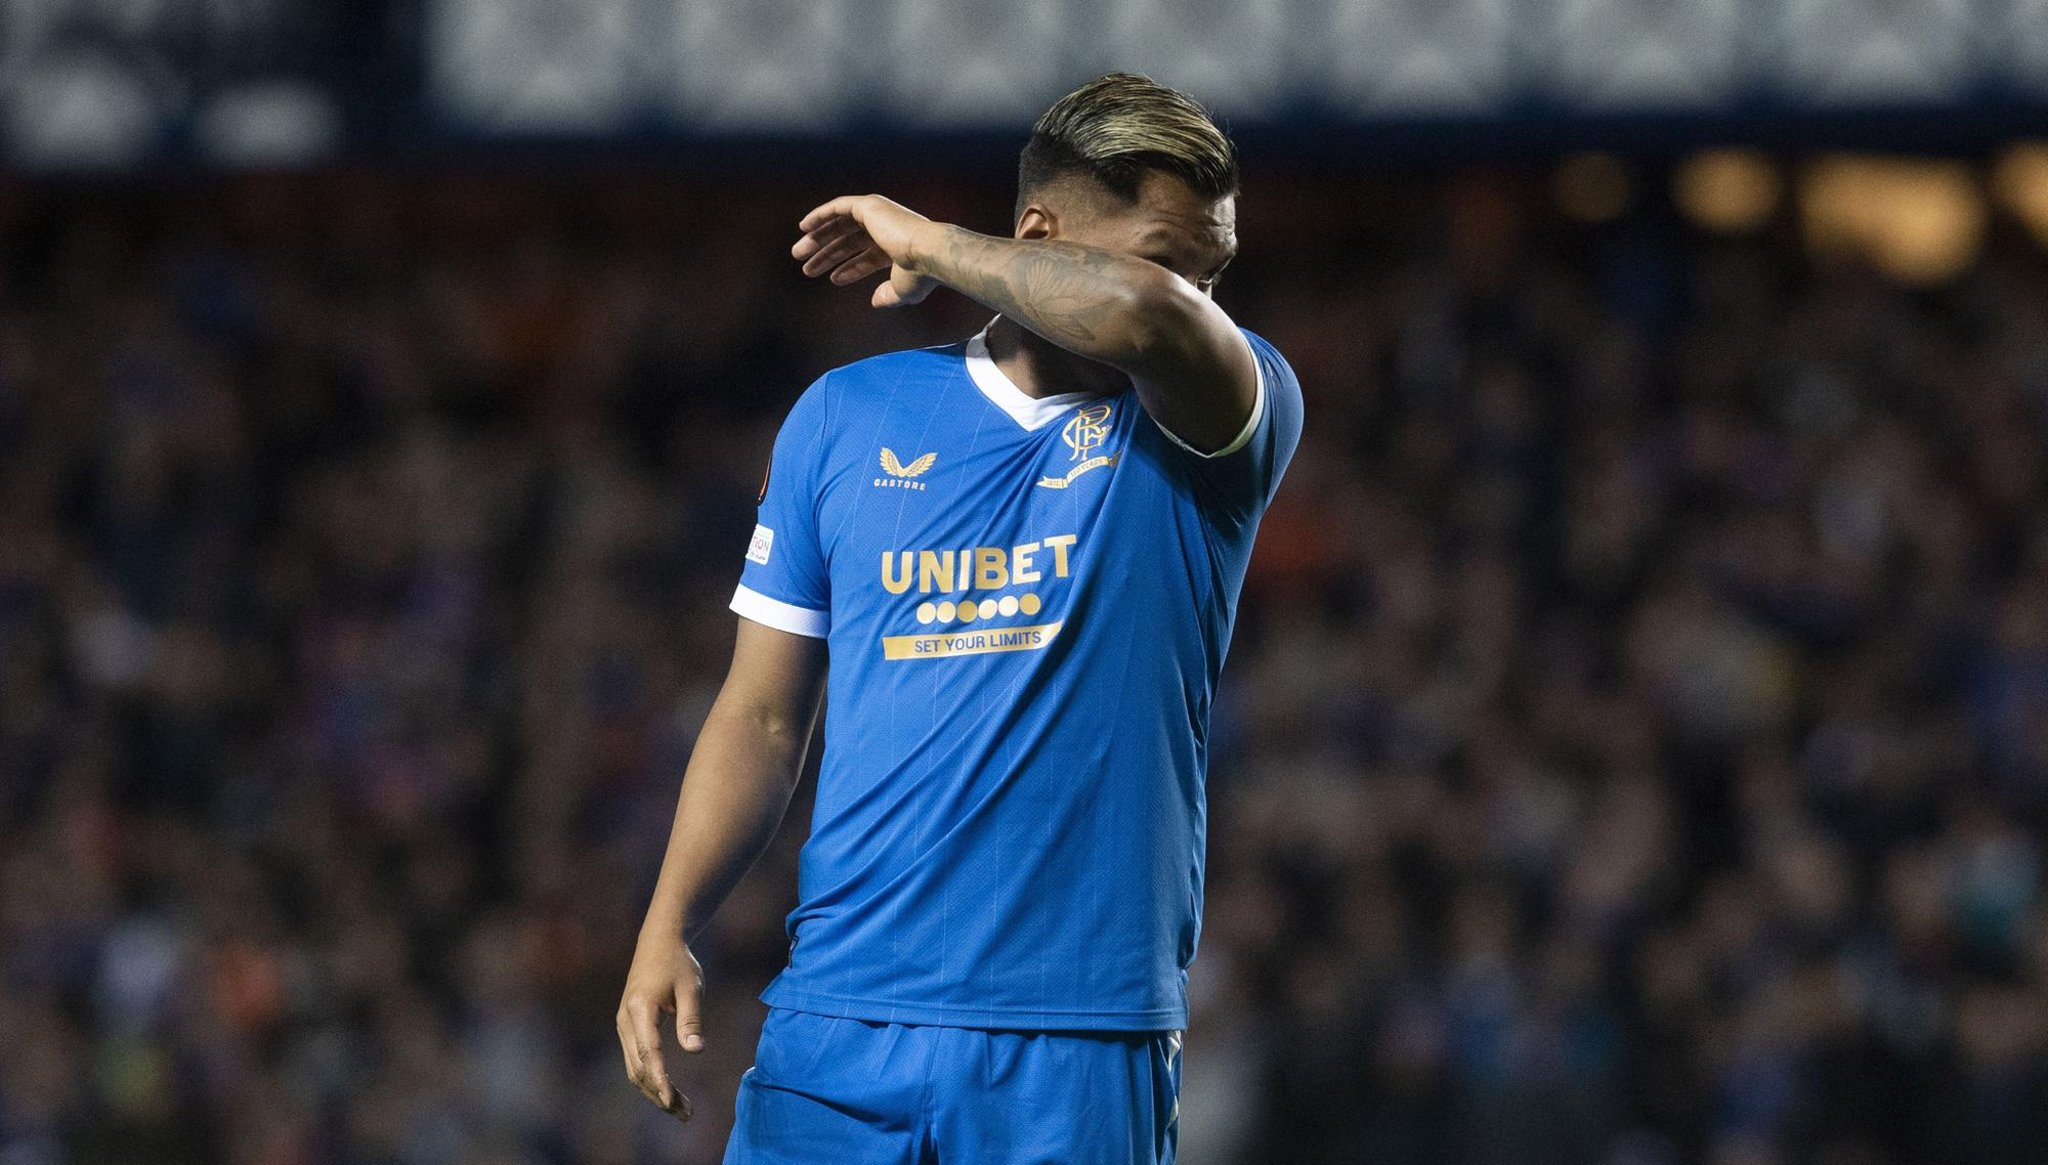 Rangers confirm Alfredo Morelos has had surgery and will be sidelined for several months